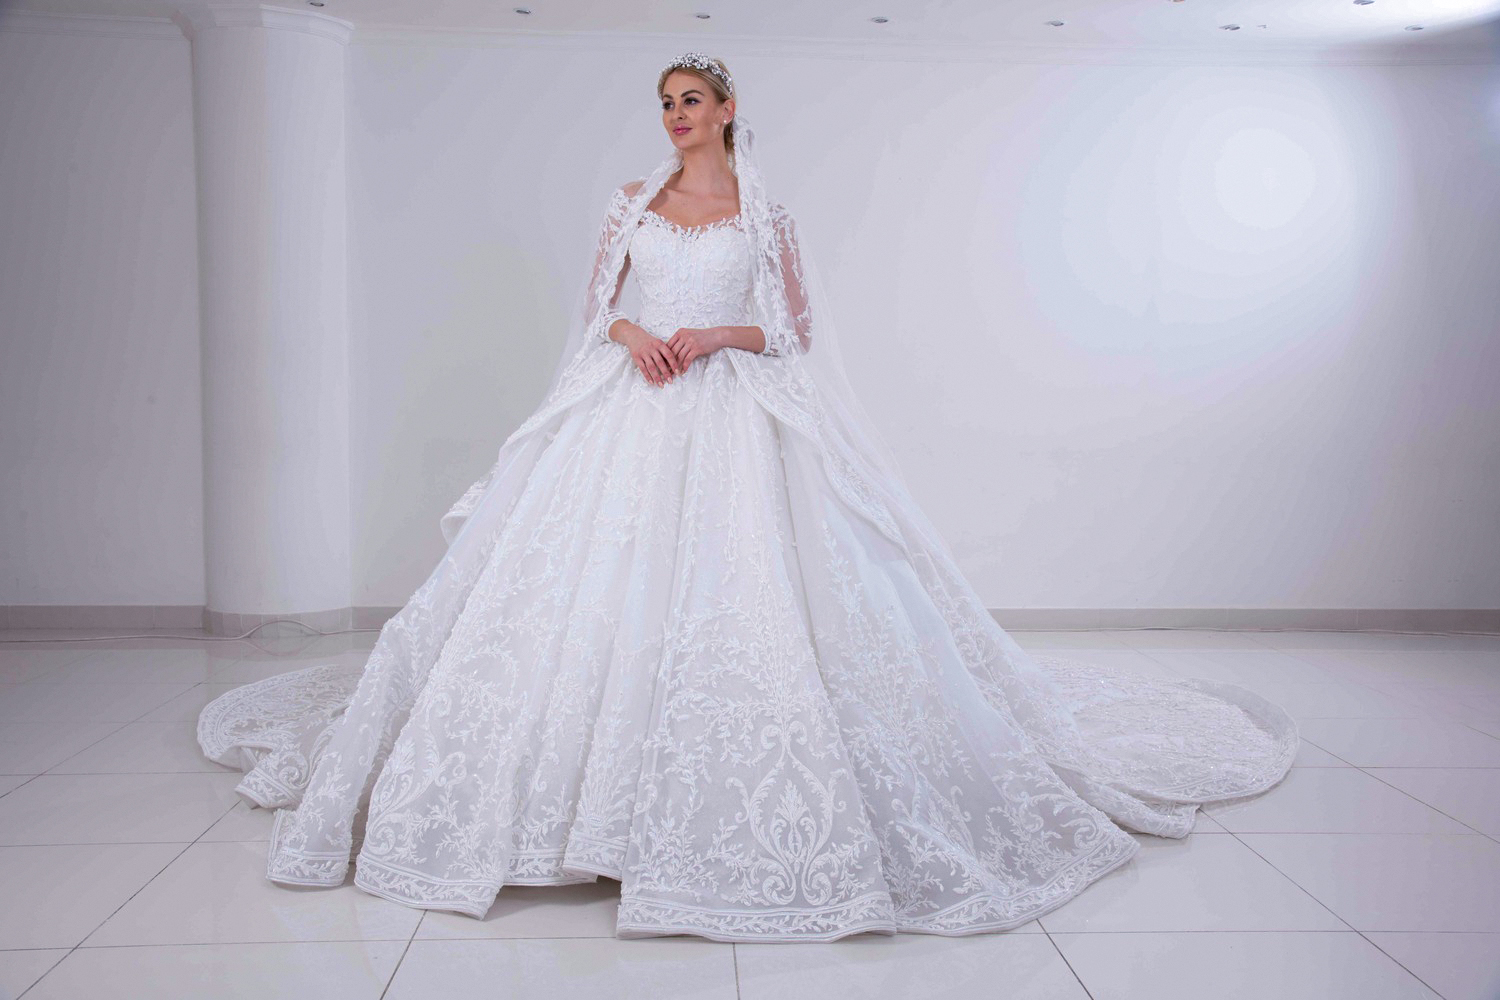 fashion atelier by darsara pict 1 Stunning bridal and wedding dresses available for rental in Dubai, UAE